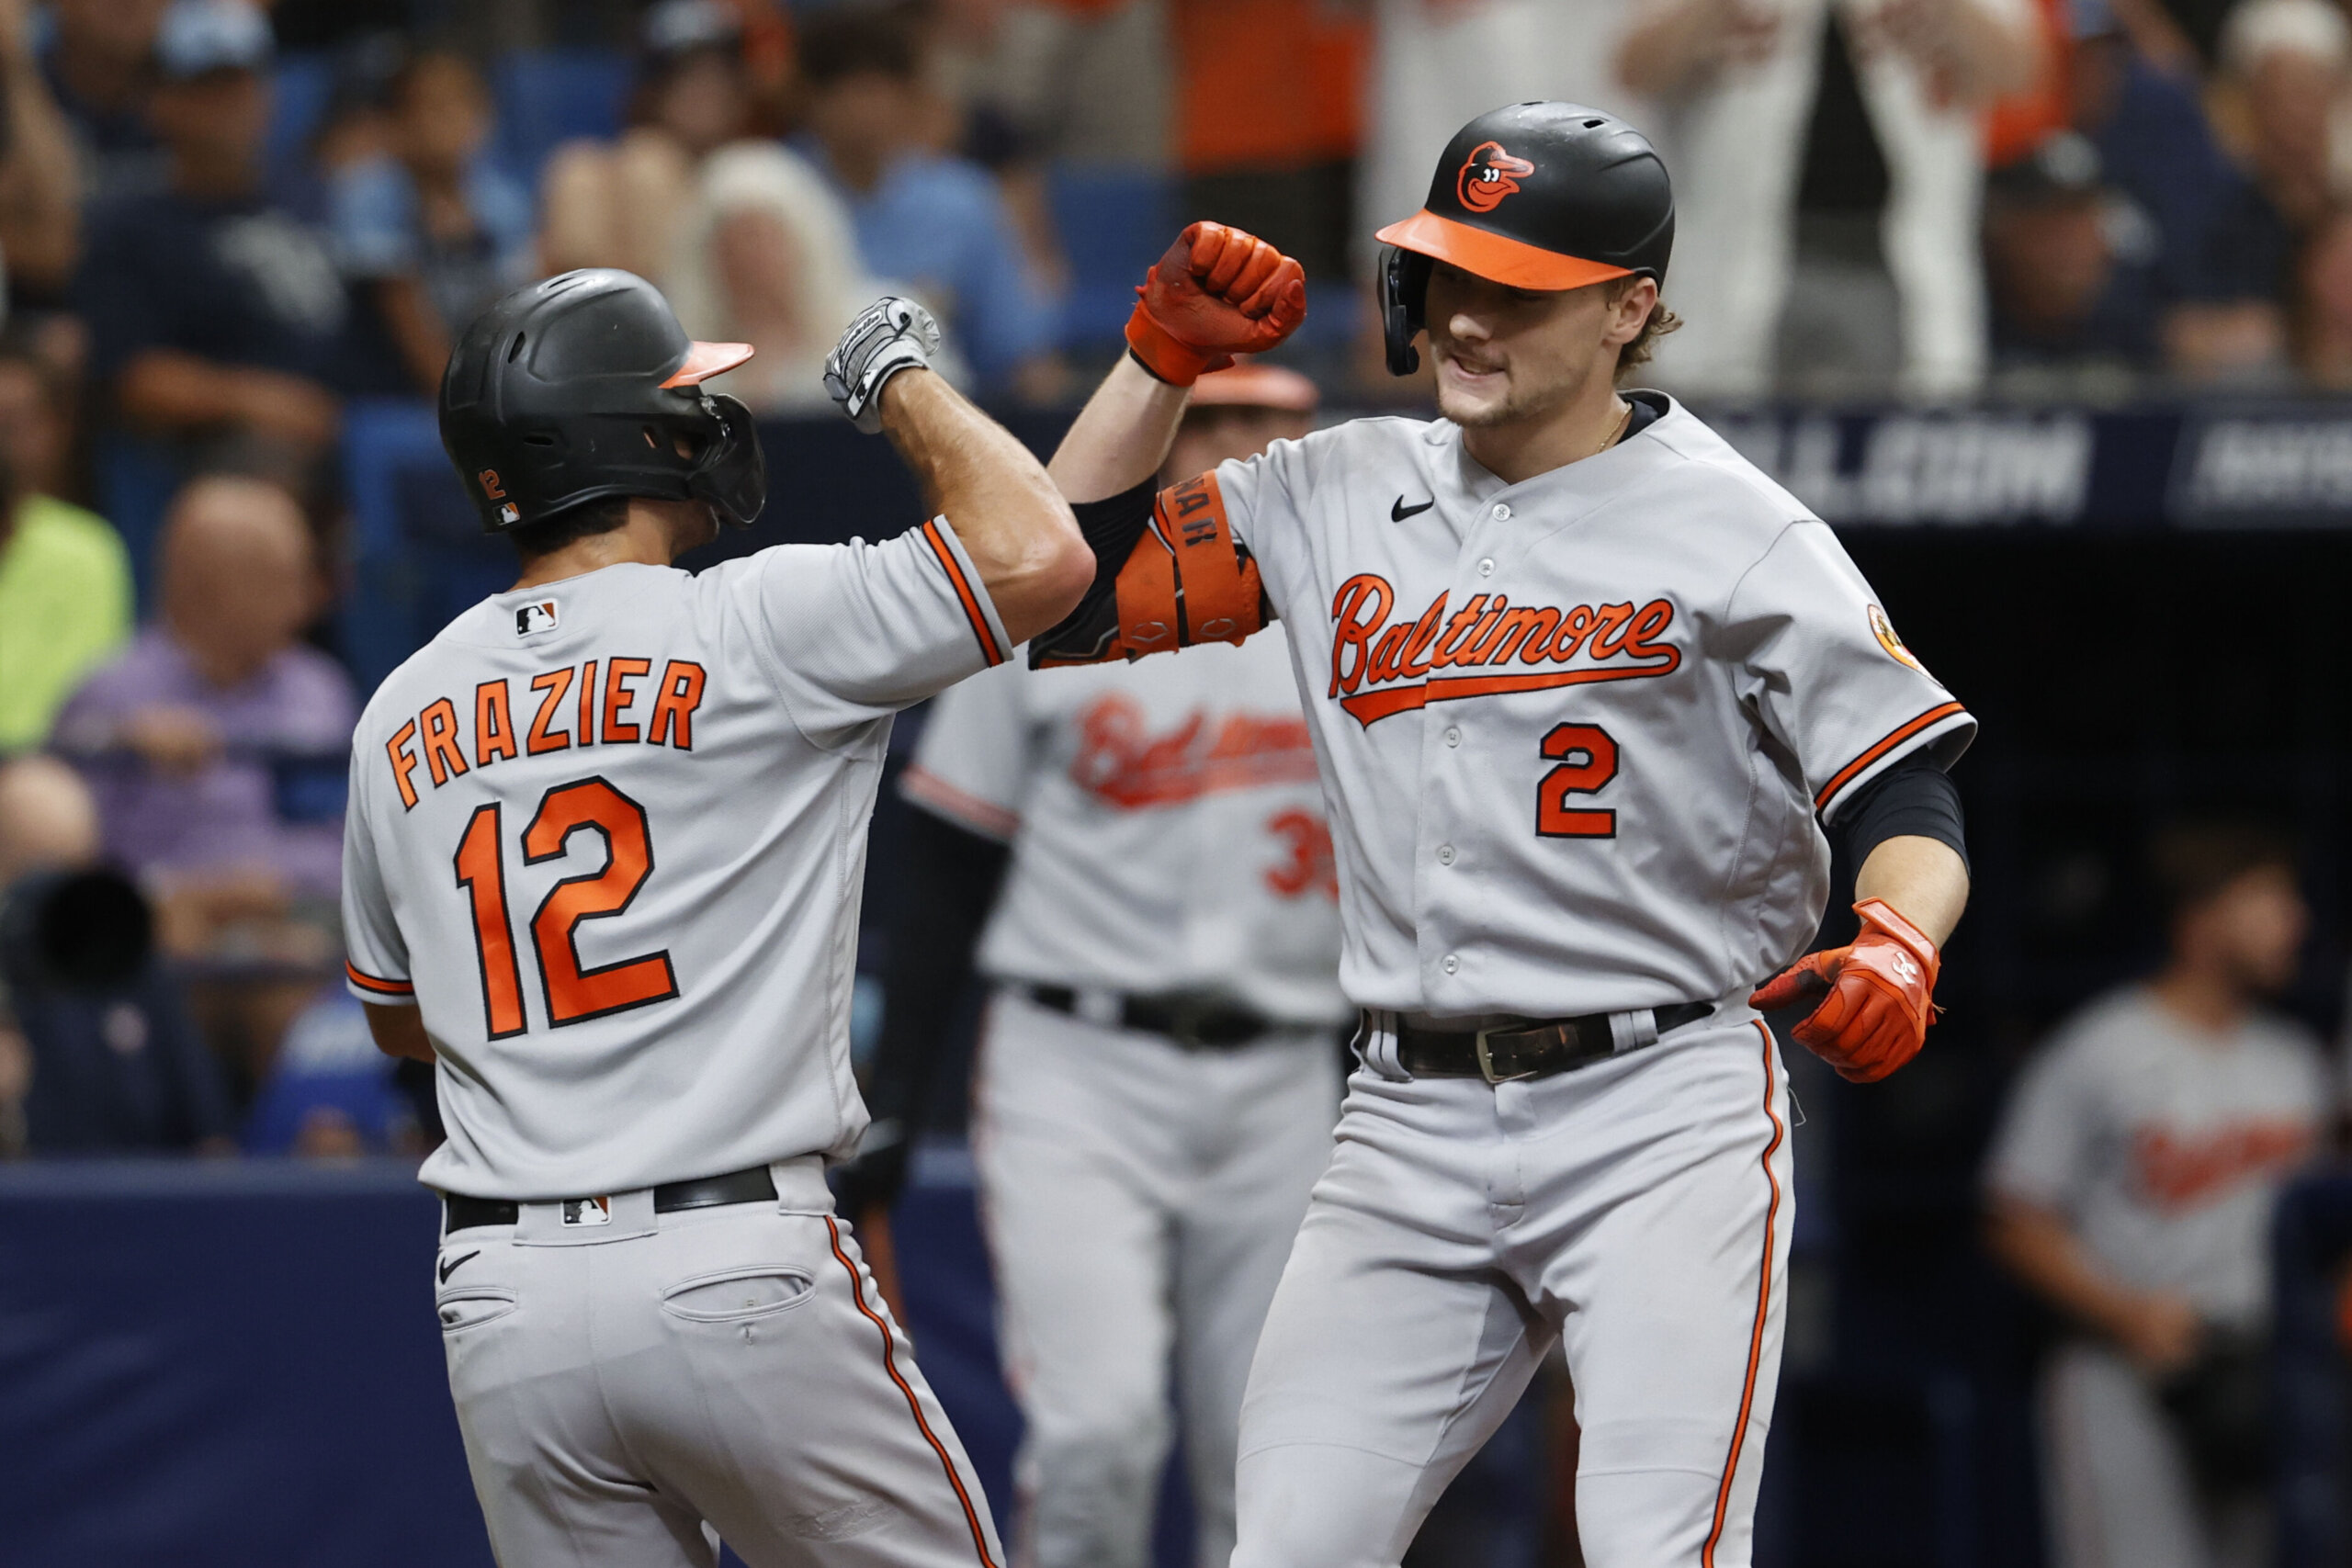 MLB: Baltimore Orioles extend lead on Tampa Bay Rays in AL East